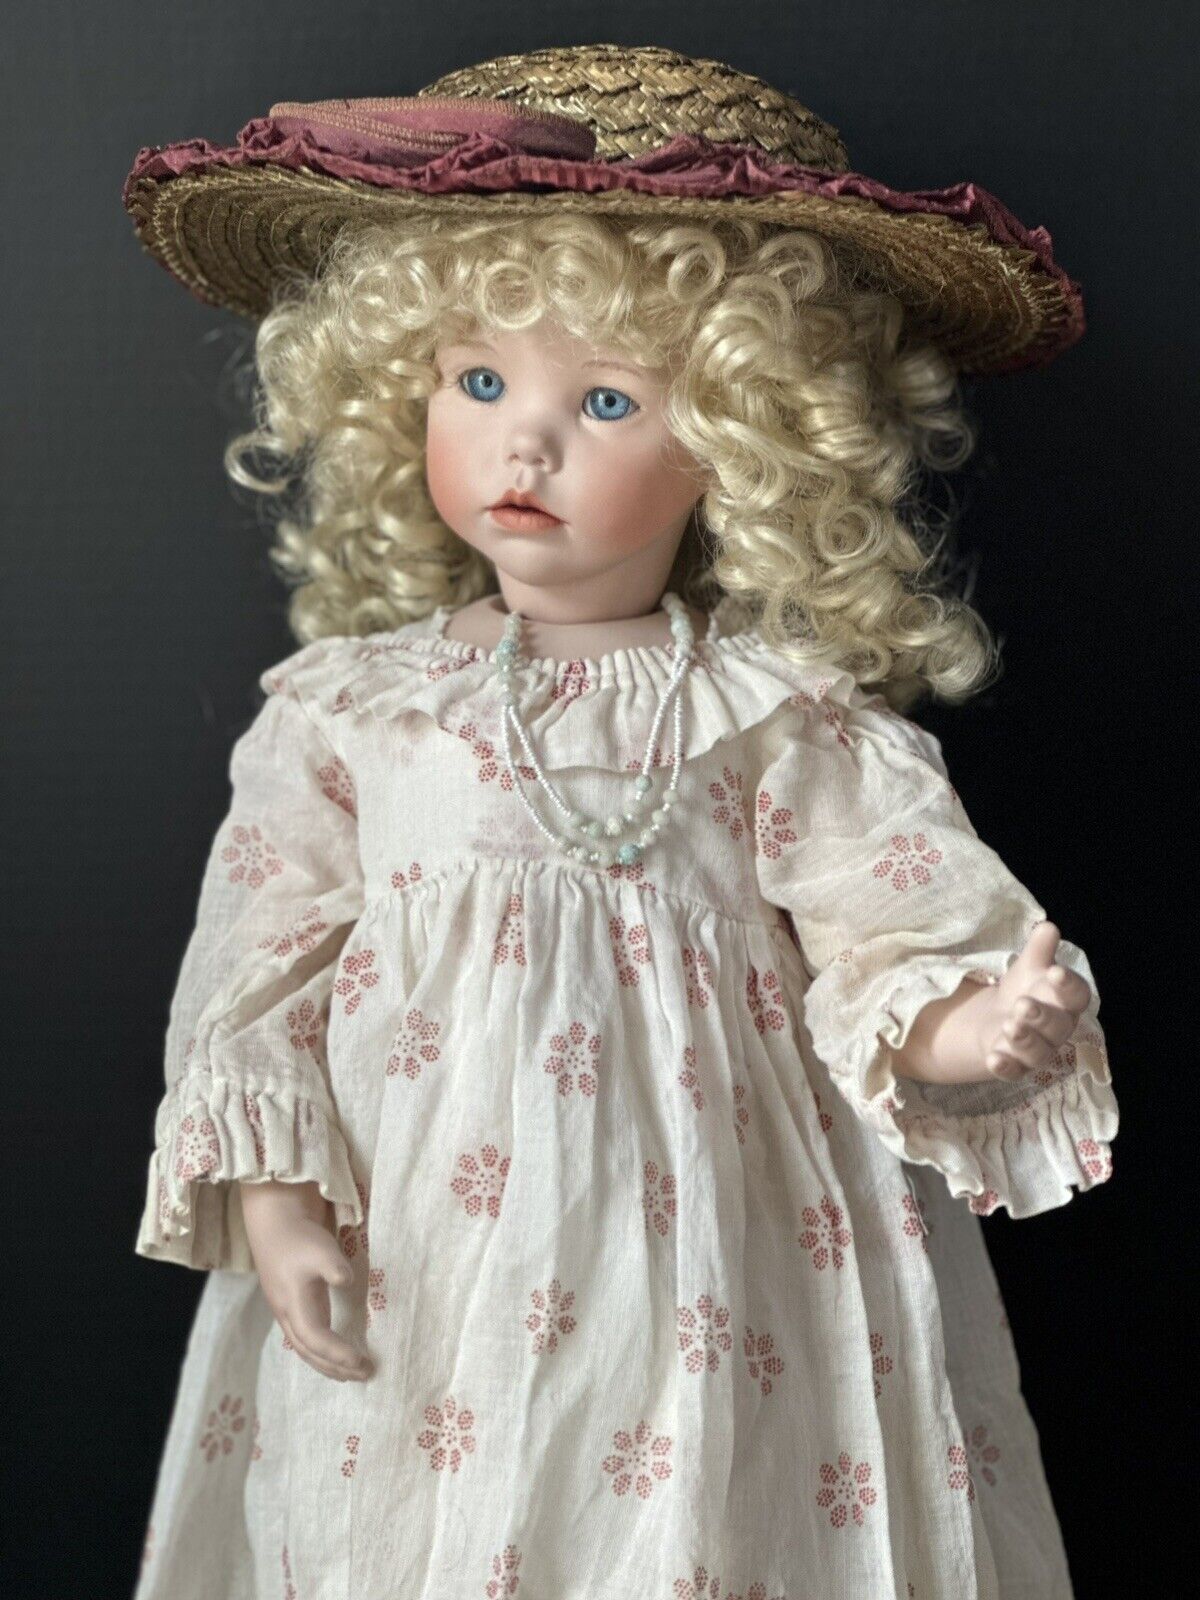 Artist Reproduction Of “Hilary” by Dianna Effner 23” Porcelain Doll French Body